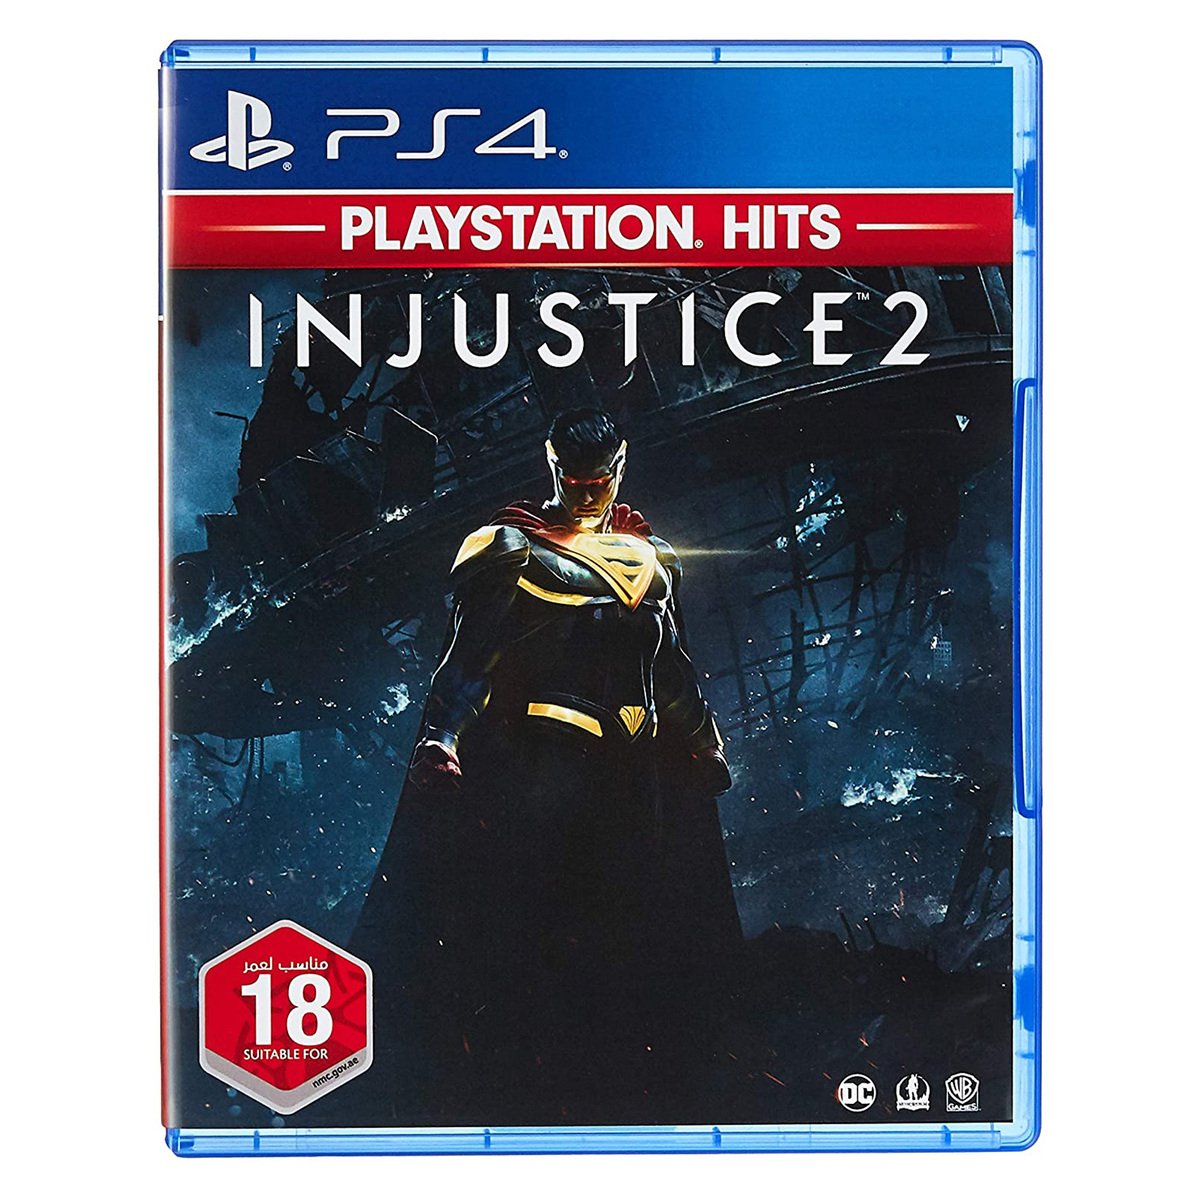 Injustice 2 Hits Game (PS4)